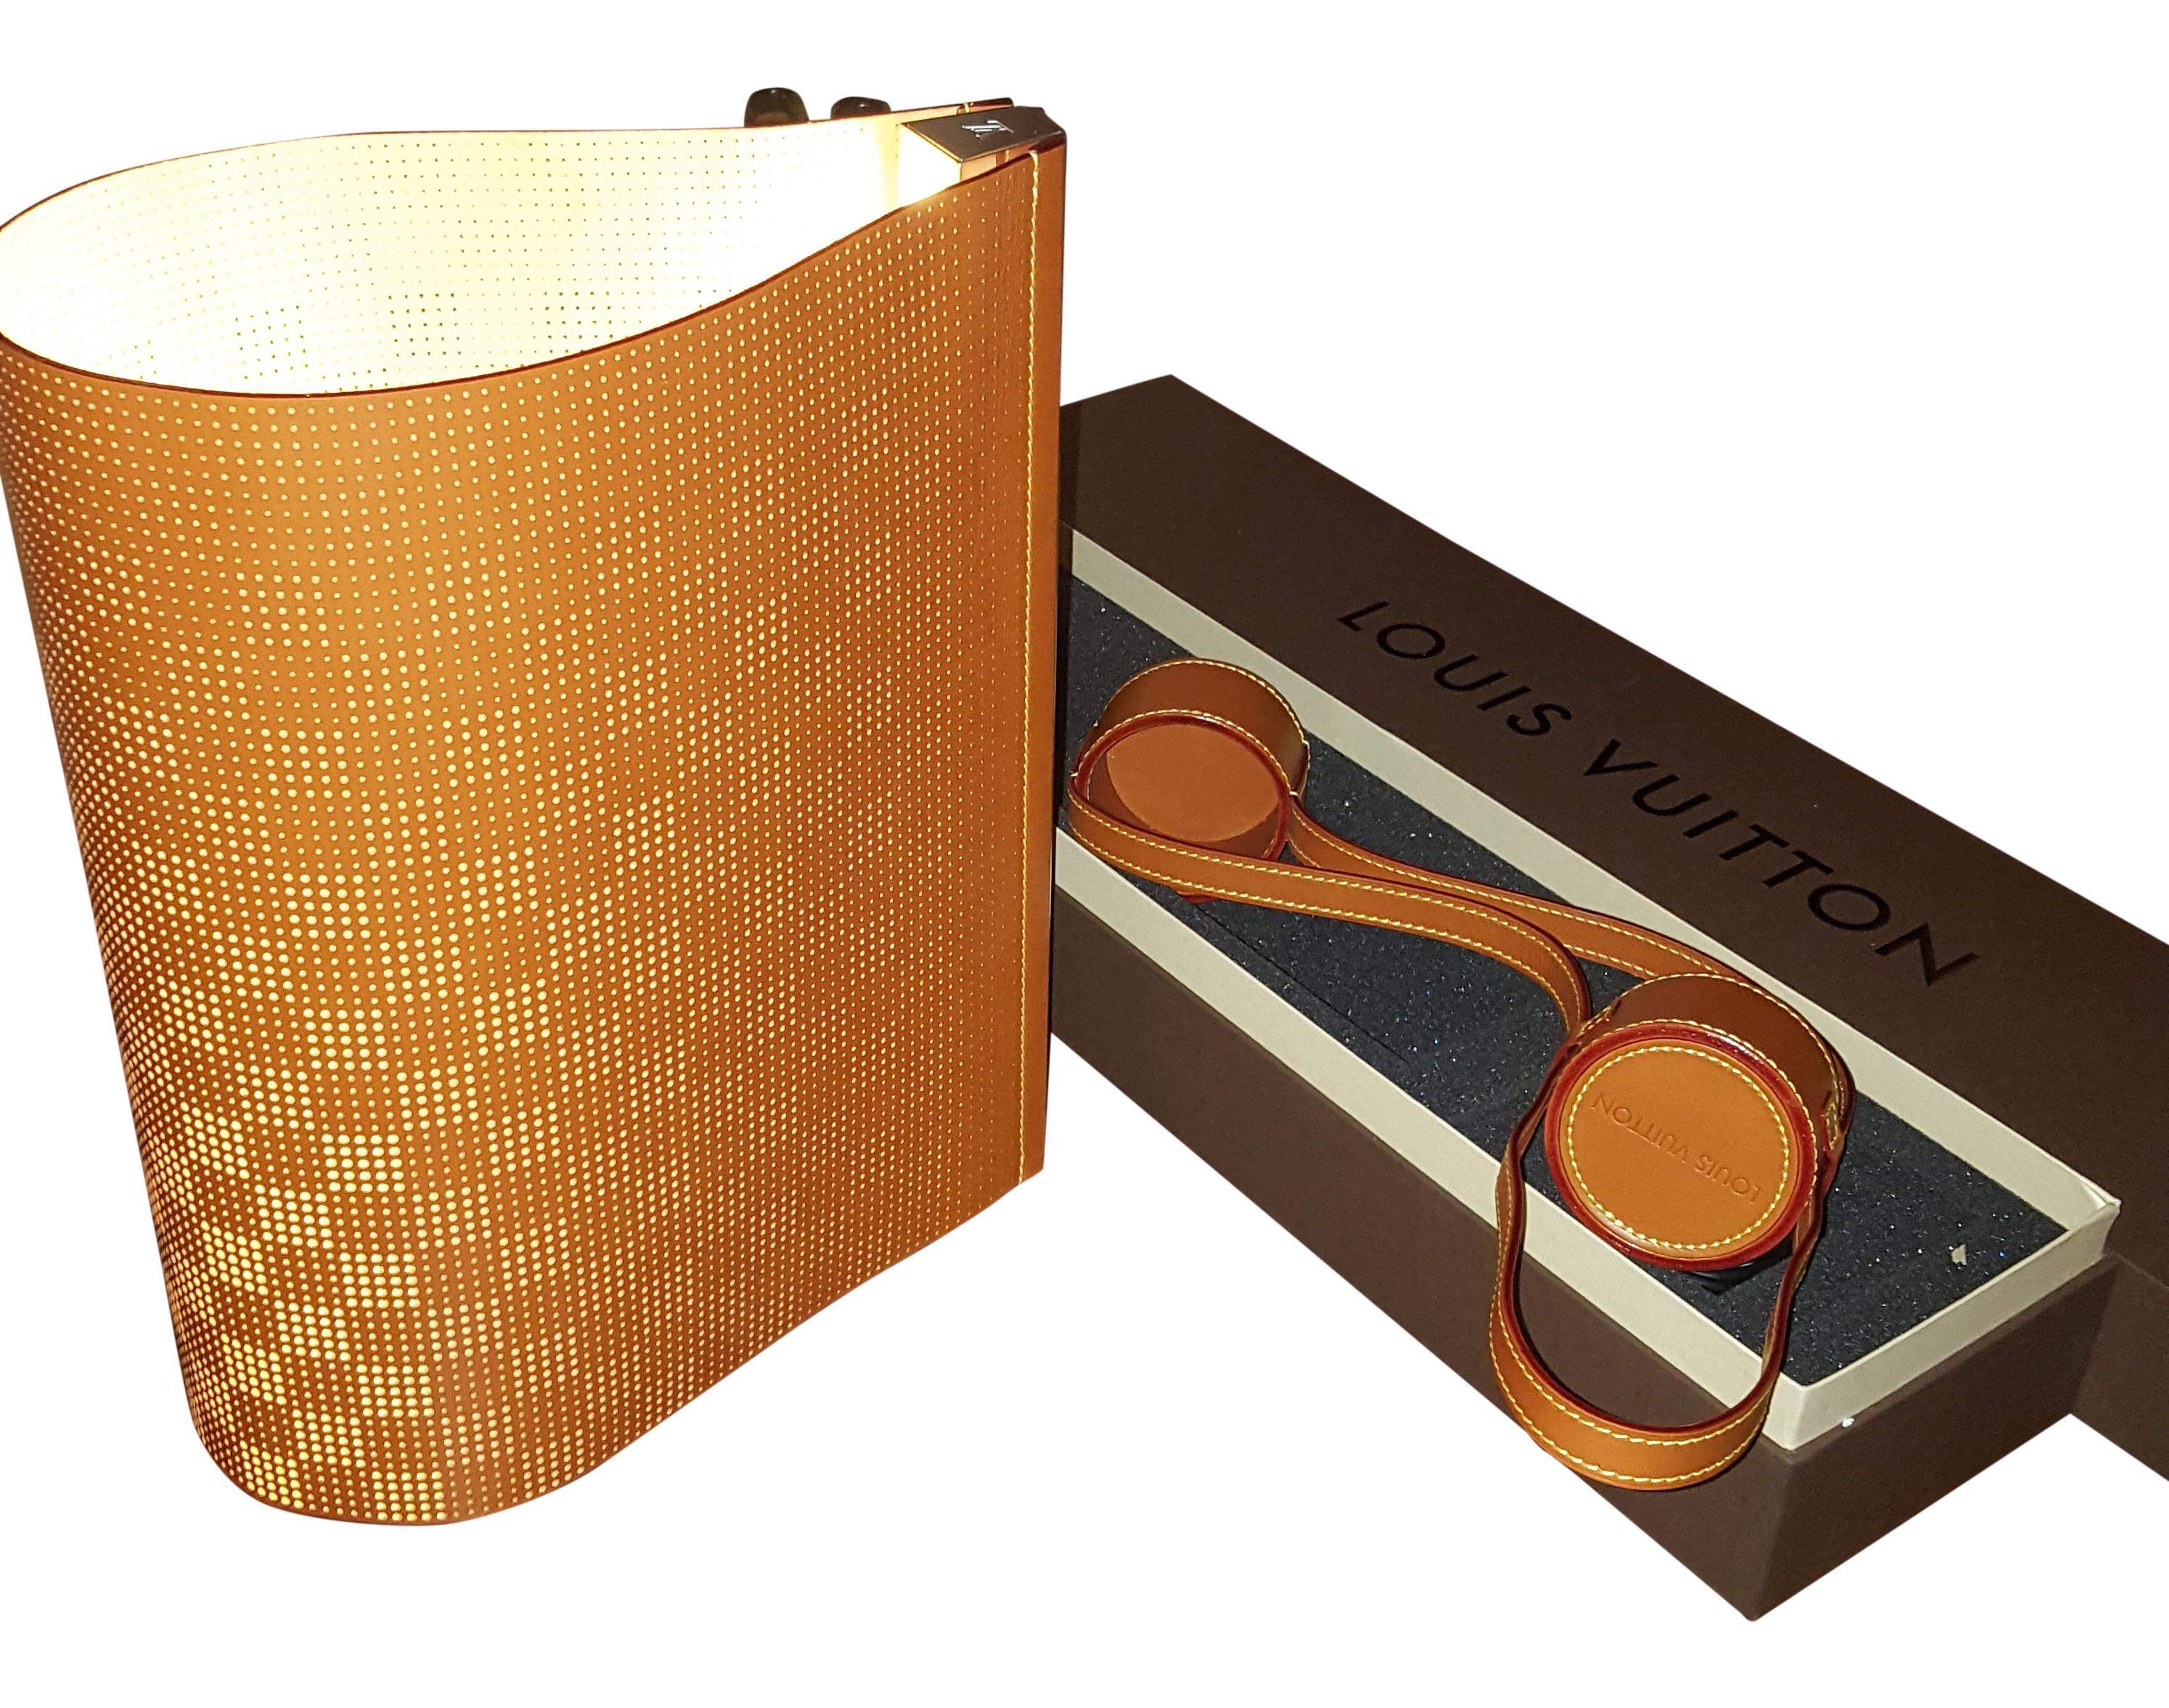 Embossed Louis Vuitton Surface Table Lamp 'Limited Edition by Nendo, Objets Nomades' For Sale